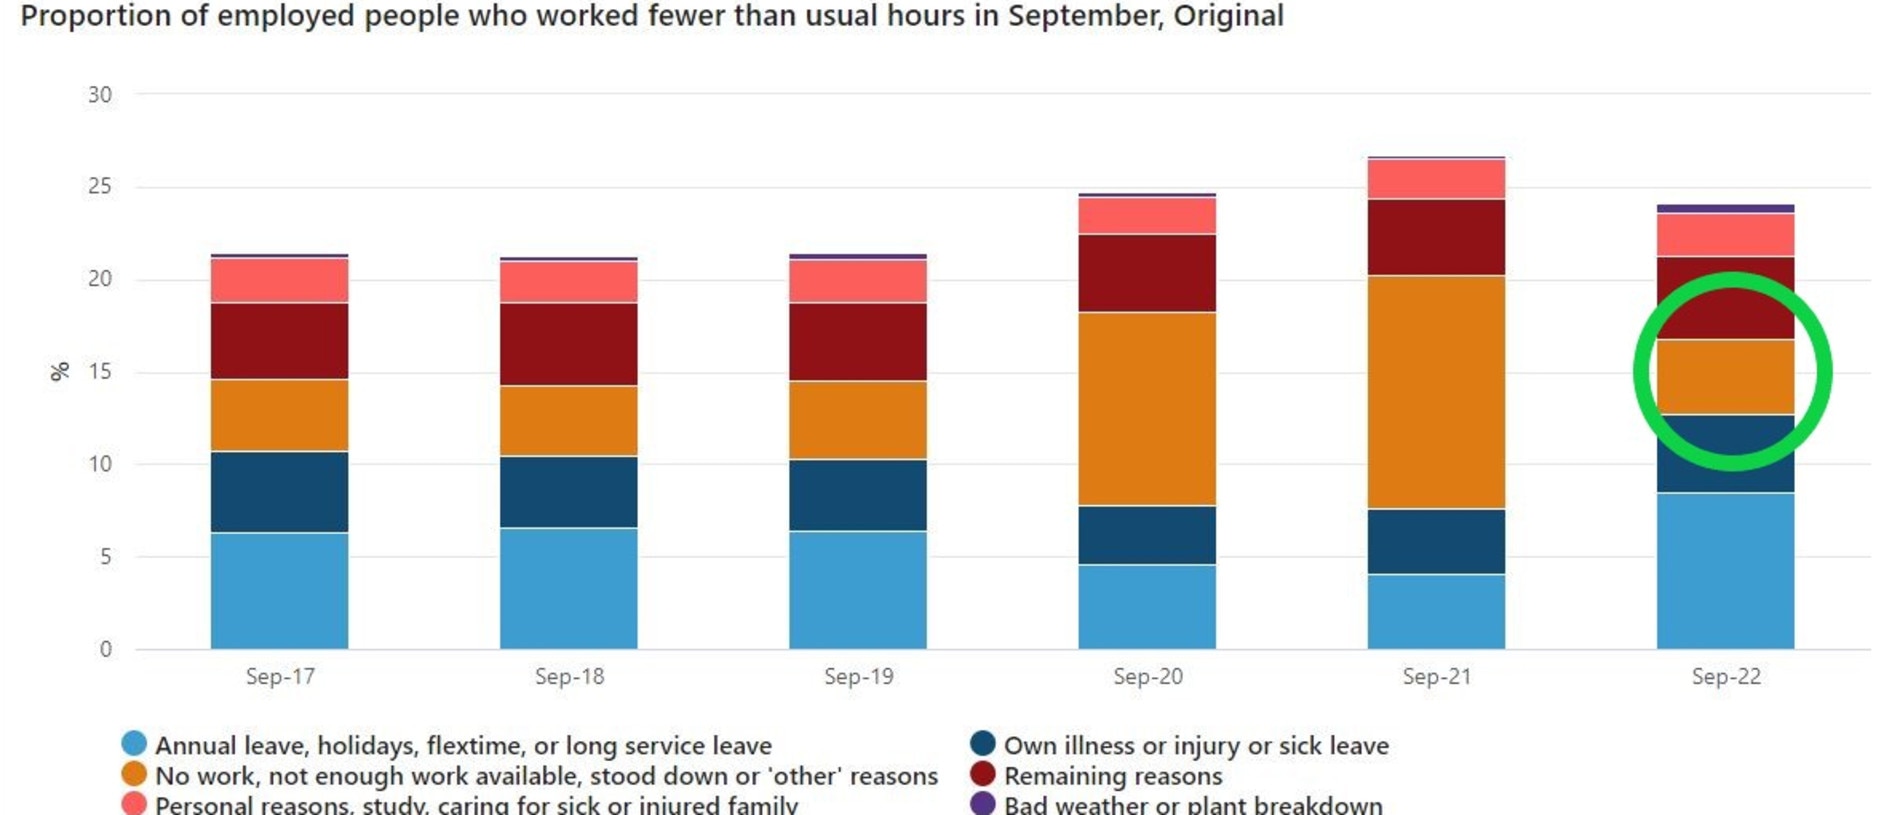 The proportion of people who worked fewer hours than usual in September from 2017 to 2022, and why. Picture: ABS